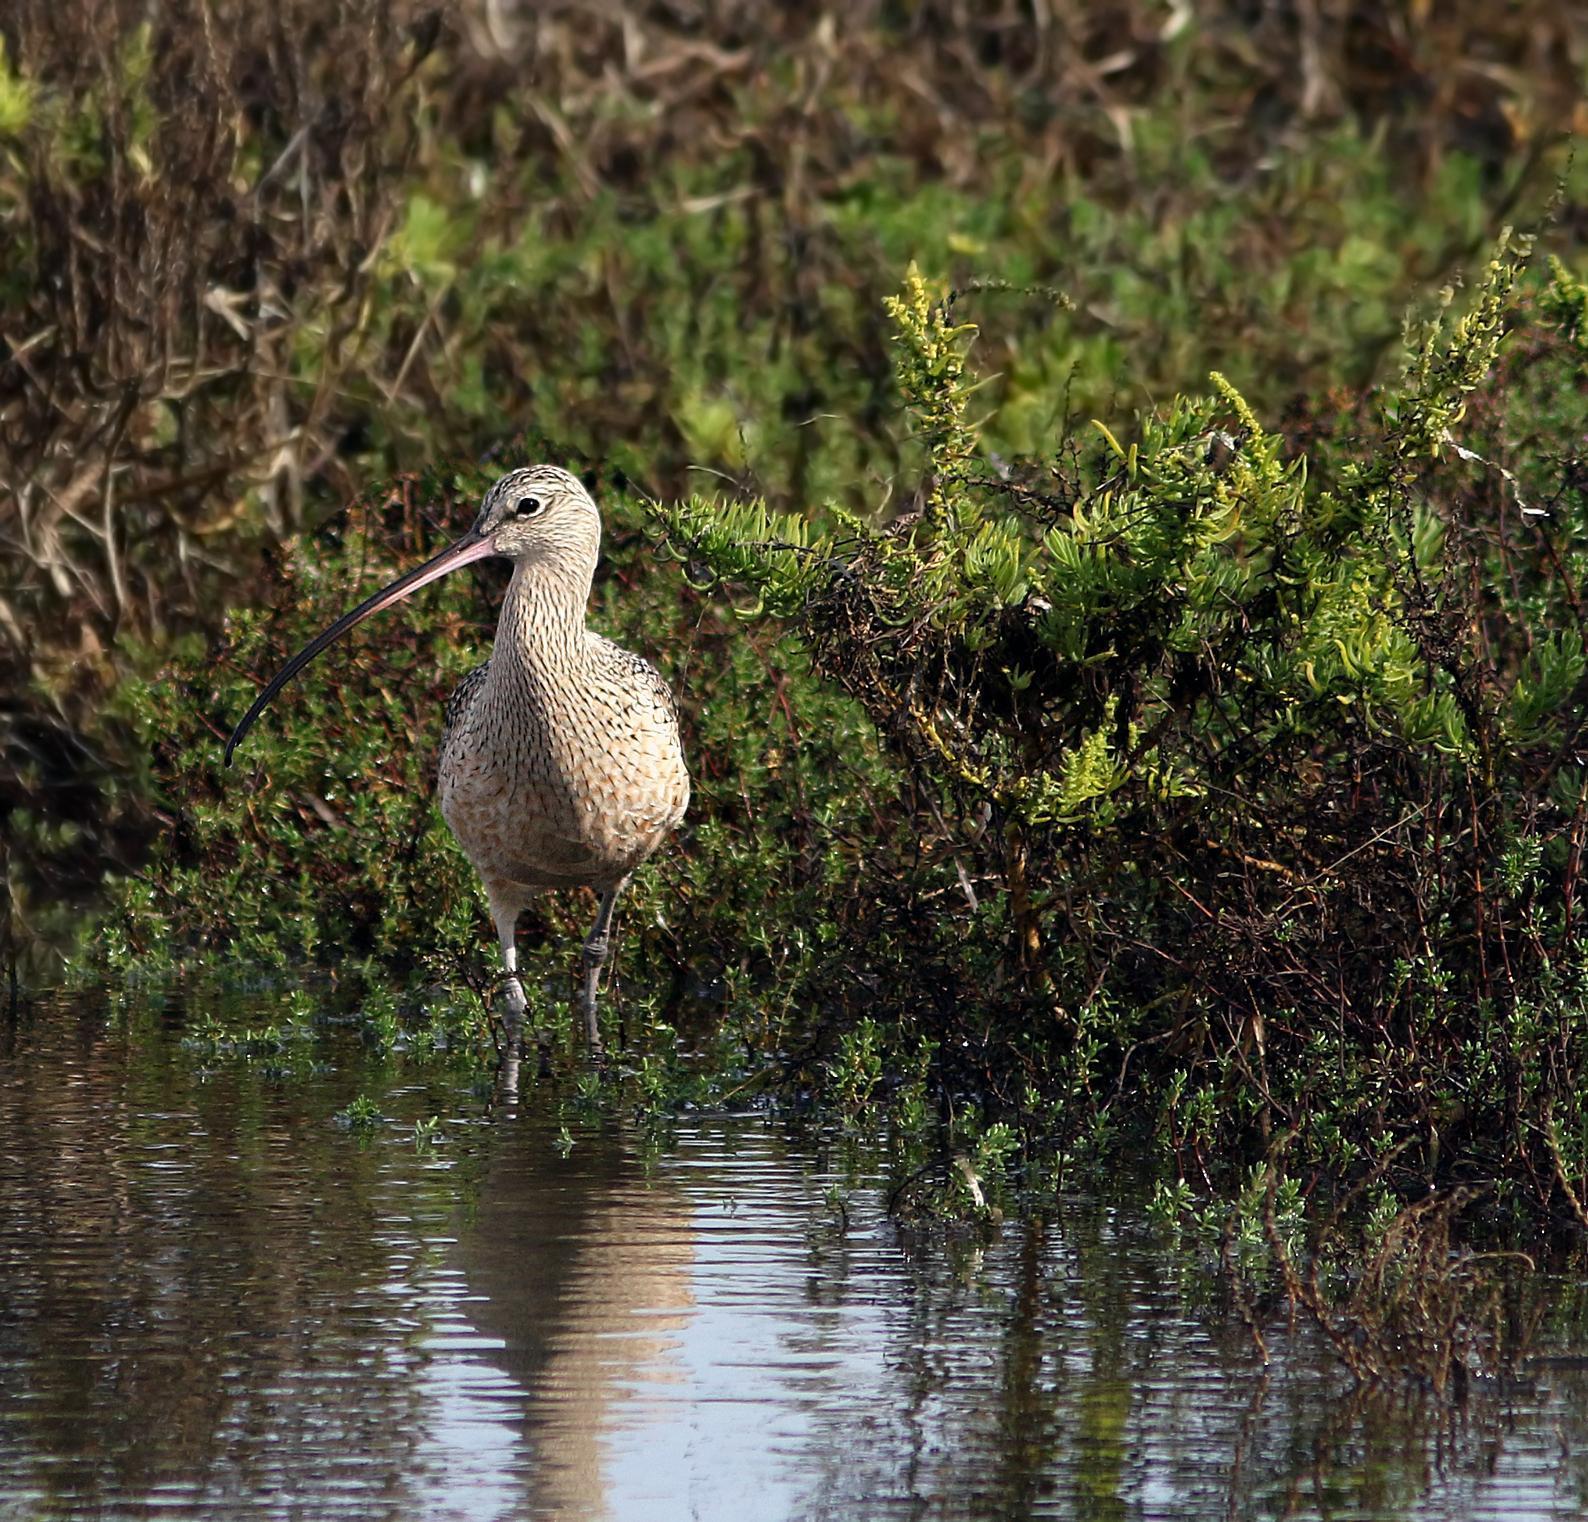 Long-billed Curlew Photo by Joseph Pescatore